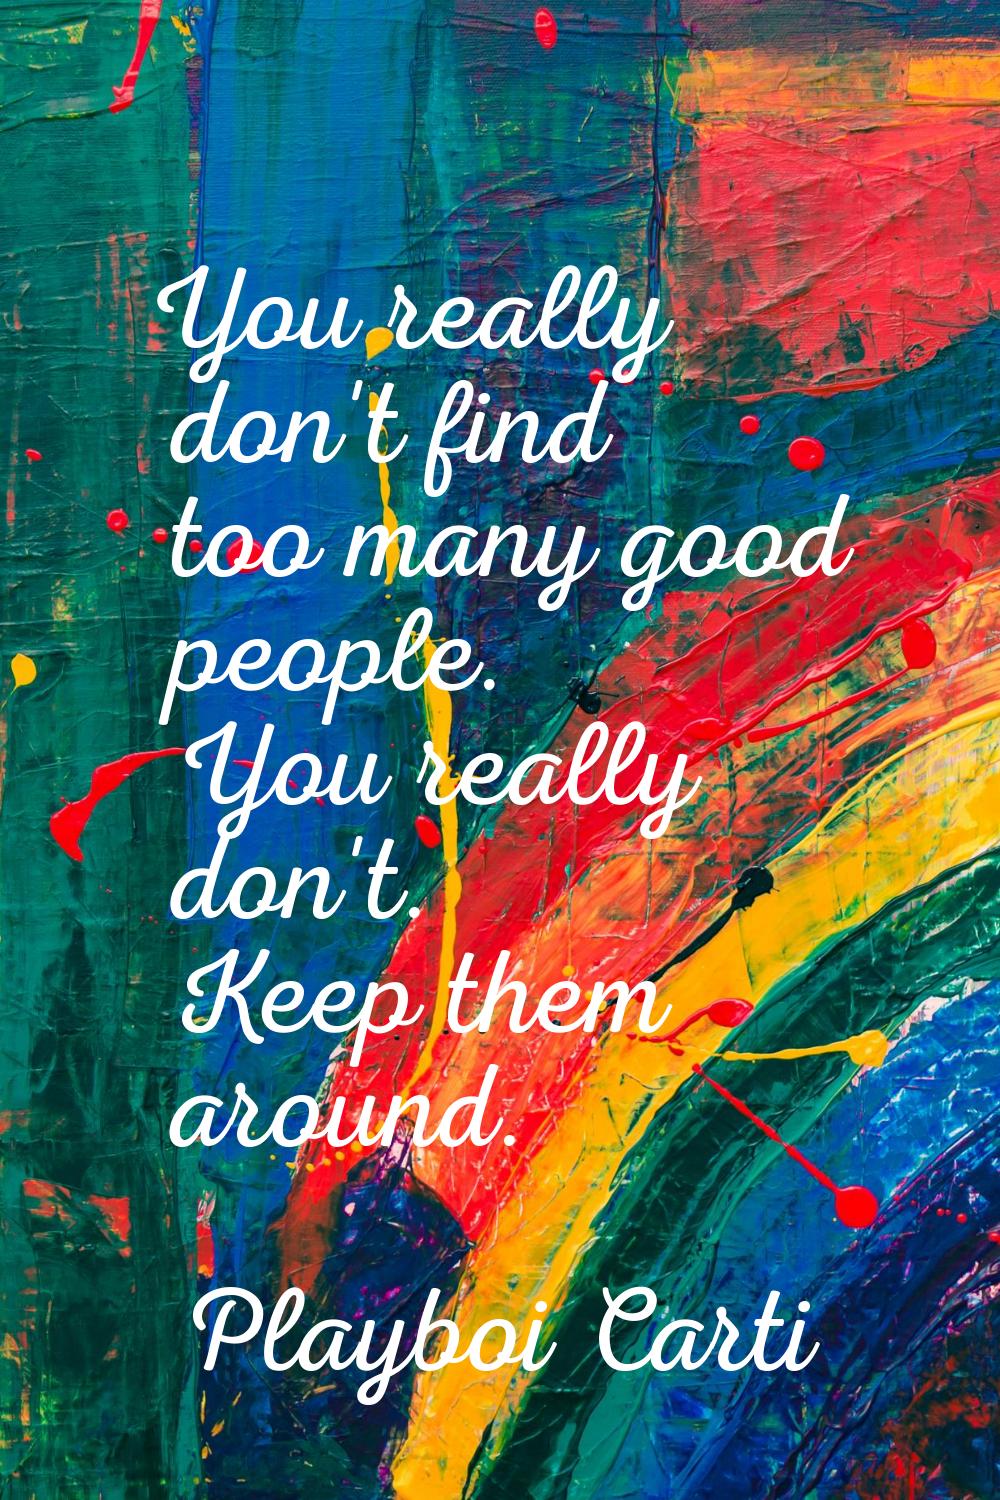 You really don't find too many good people. You really don't. Keep them around.